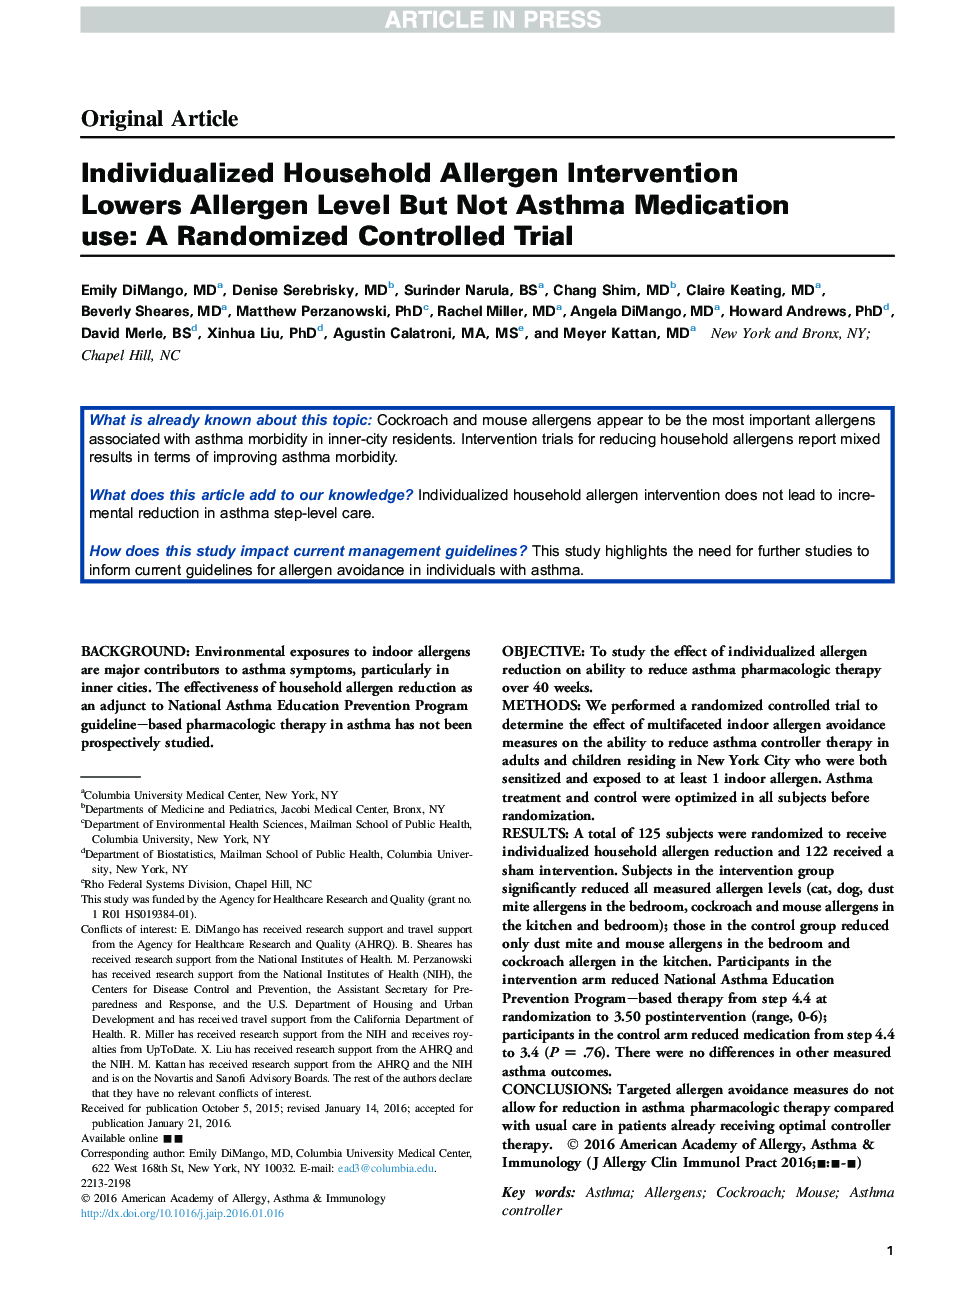 Individualized Household Allergen Intervention Lowers Allergen Level But Not Asthma Medication Use: A Randomized Controlled Trial